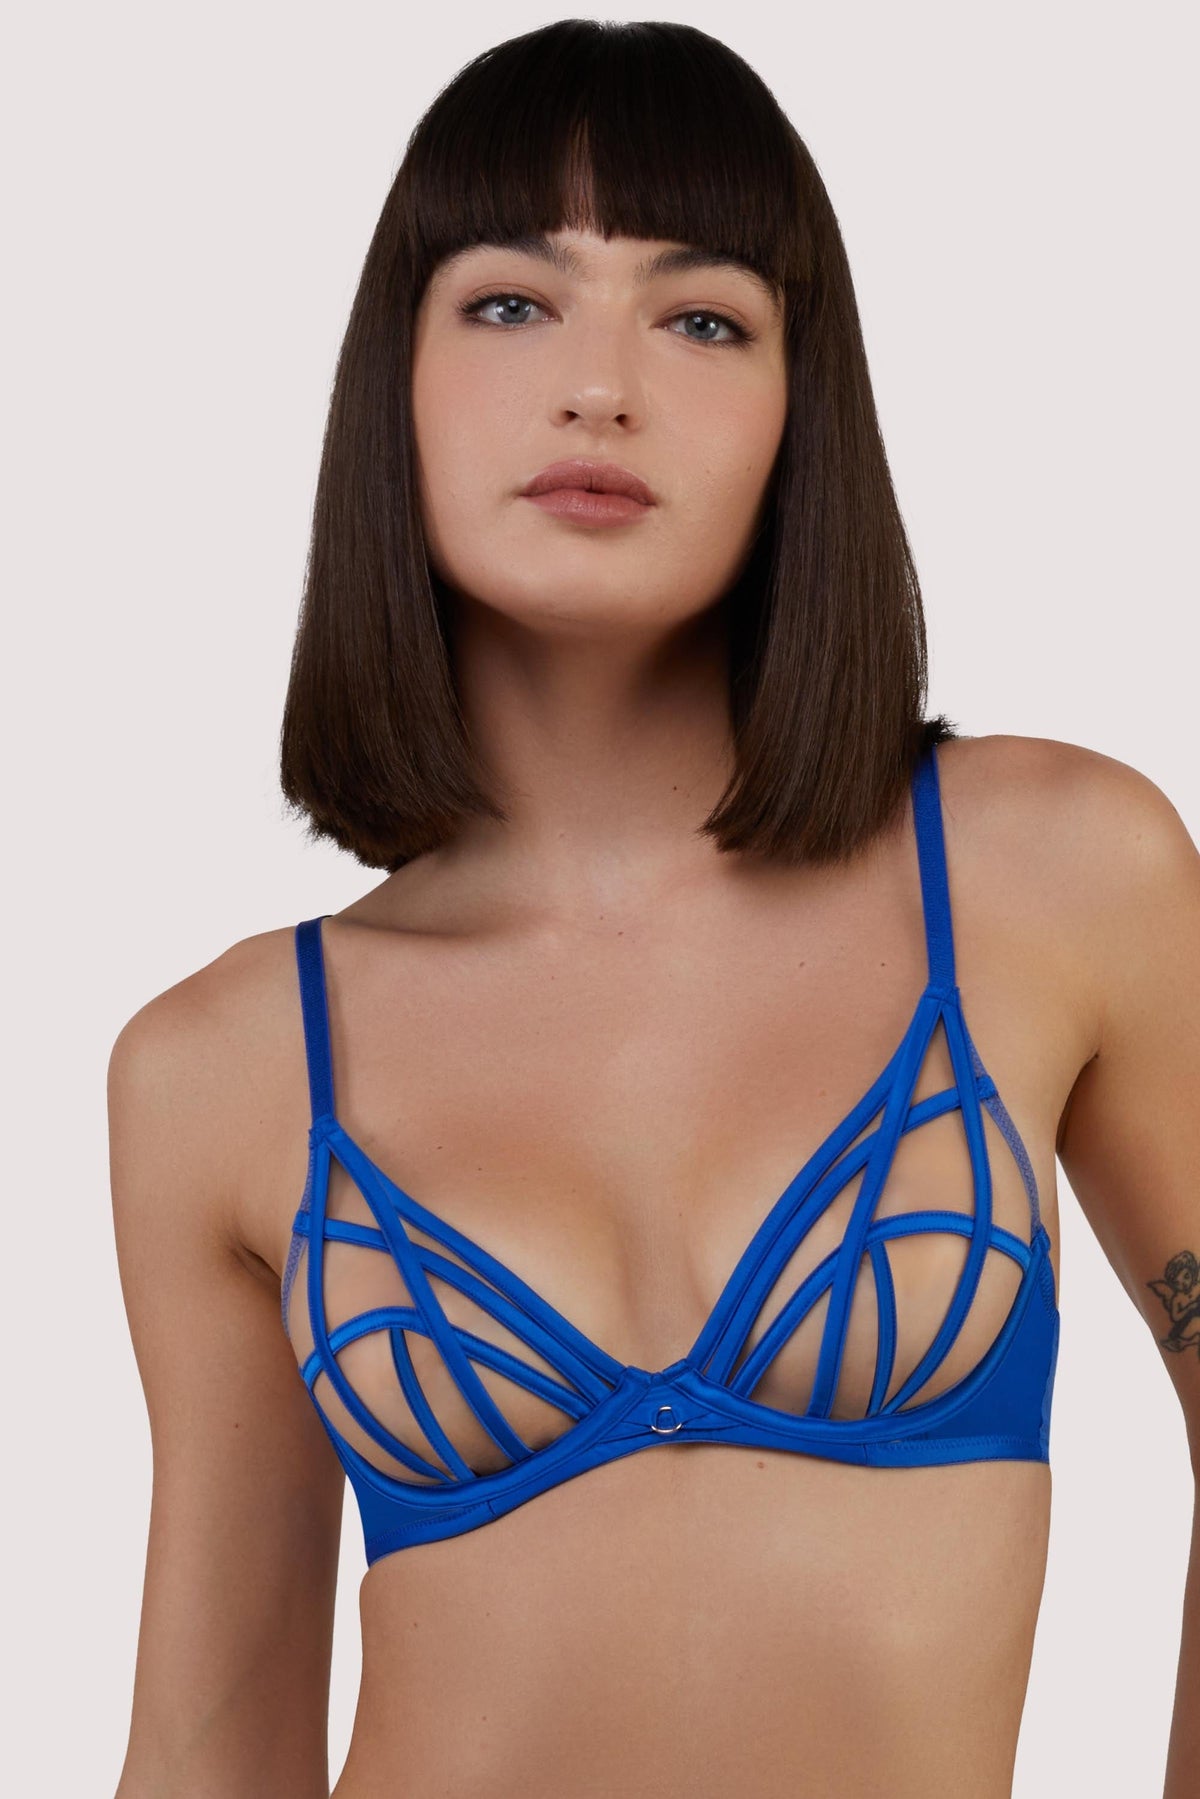 EVERYTHING MUST GO Stance TWISTED TRIANGLE SHEER - Bra - Women's - cobalt  blue - Private Sport Shop